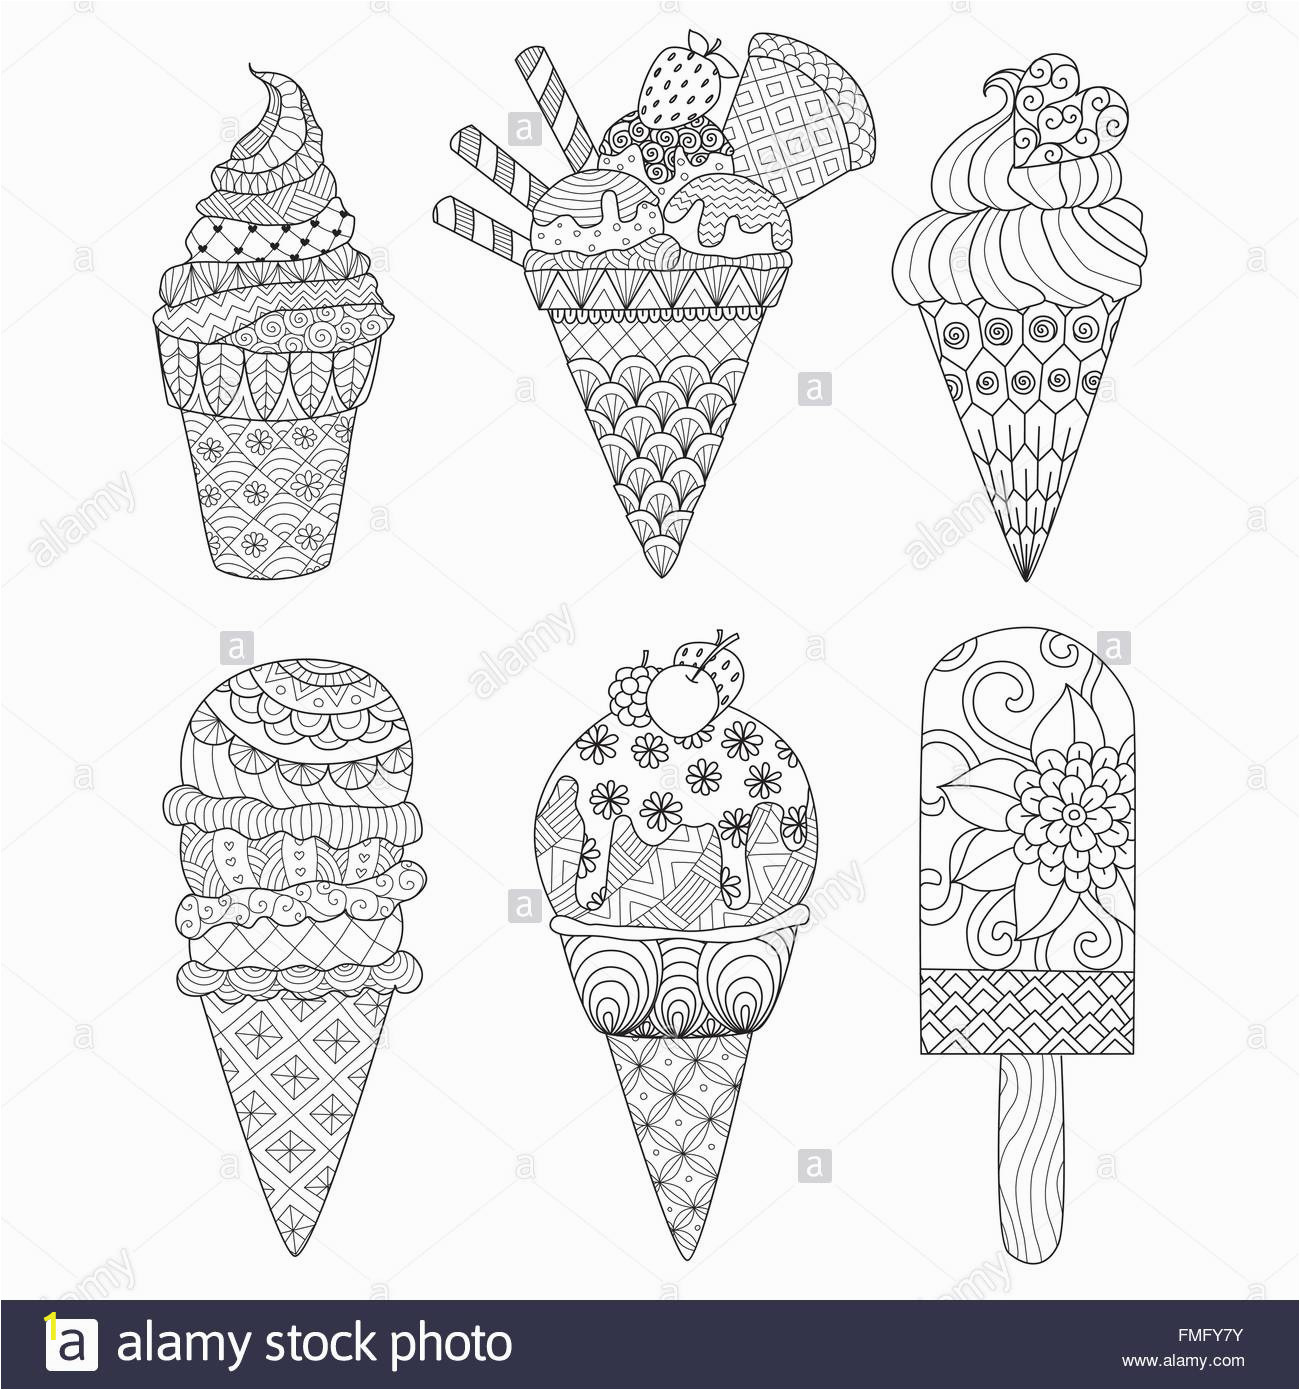 zentangle ice cream set for coloring book for adult and other decorations FMFY7Y